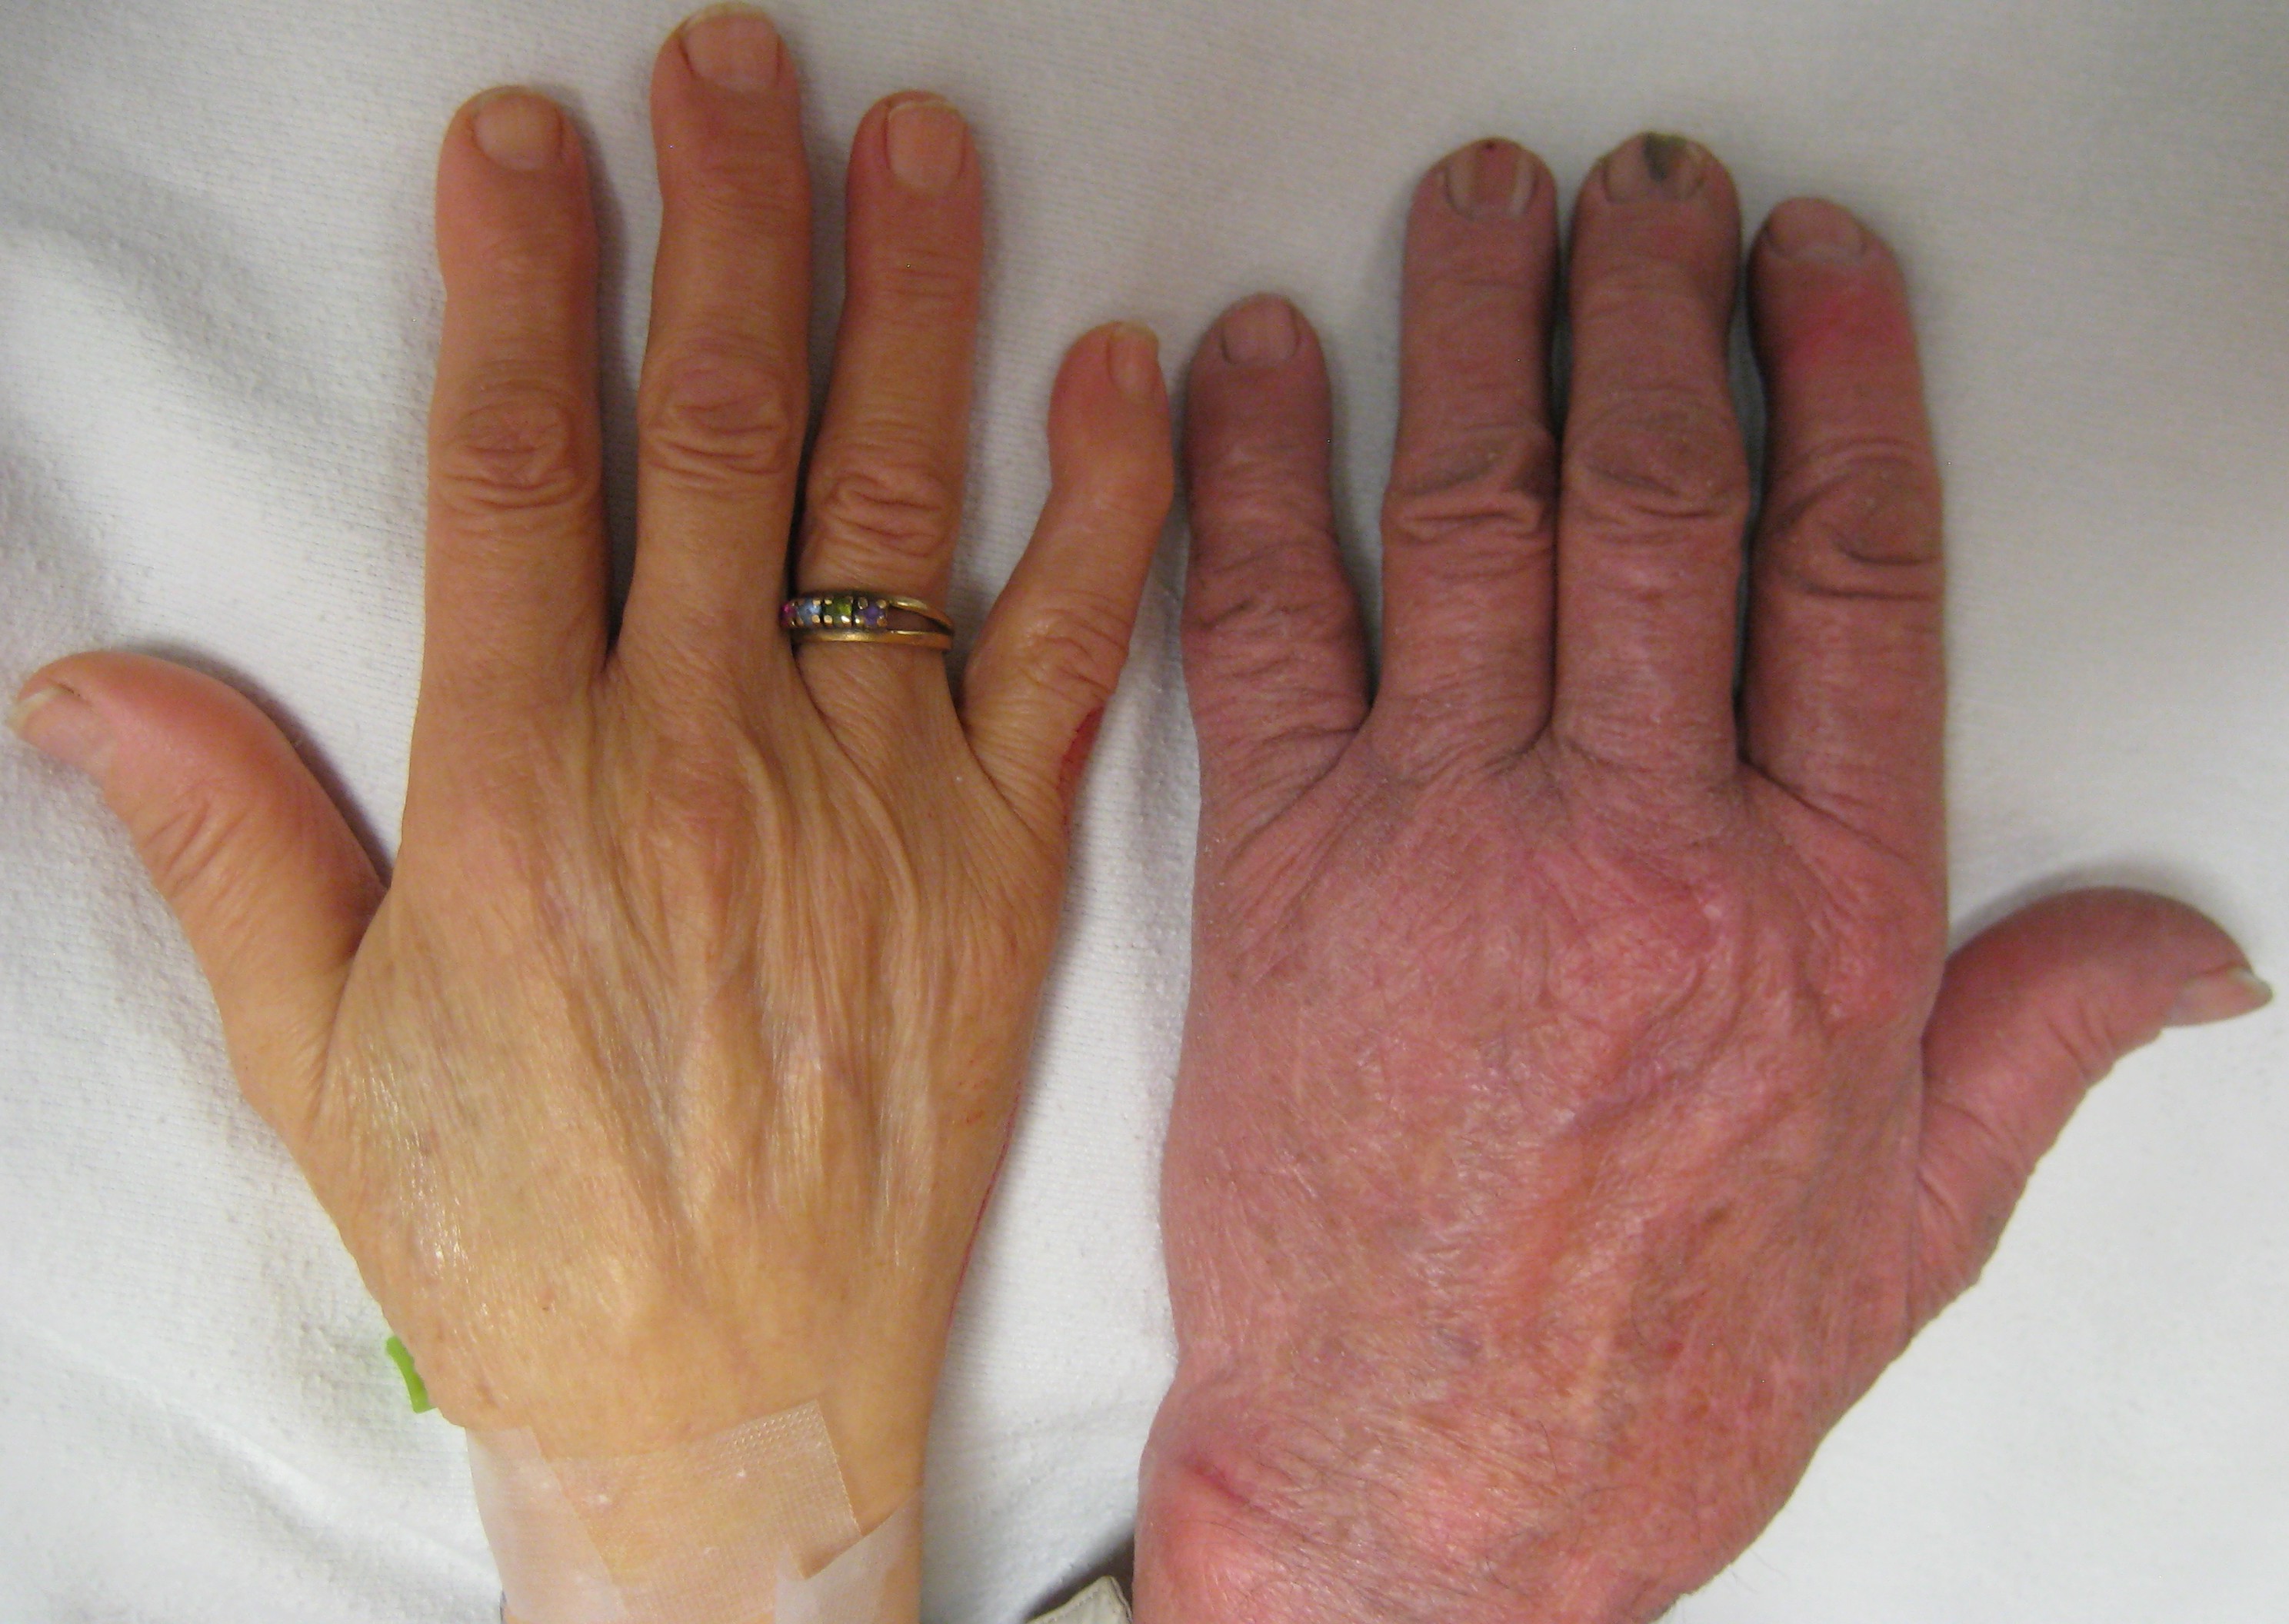 The hand of a person with severe anemia (on the left) compared to one without (on the right)By James Heilman, MD - Own work[2]